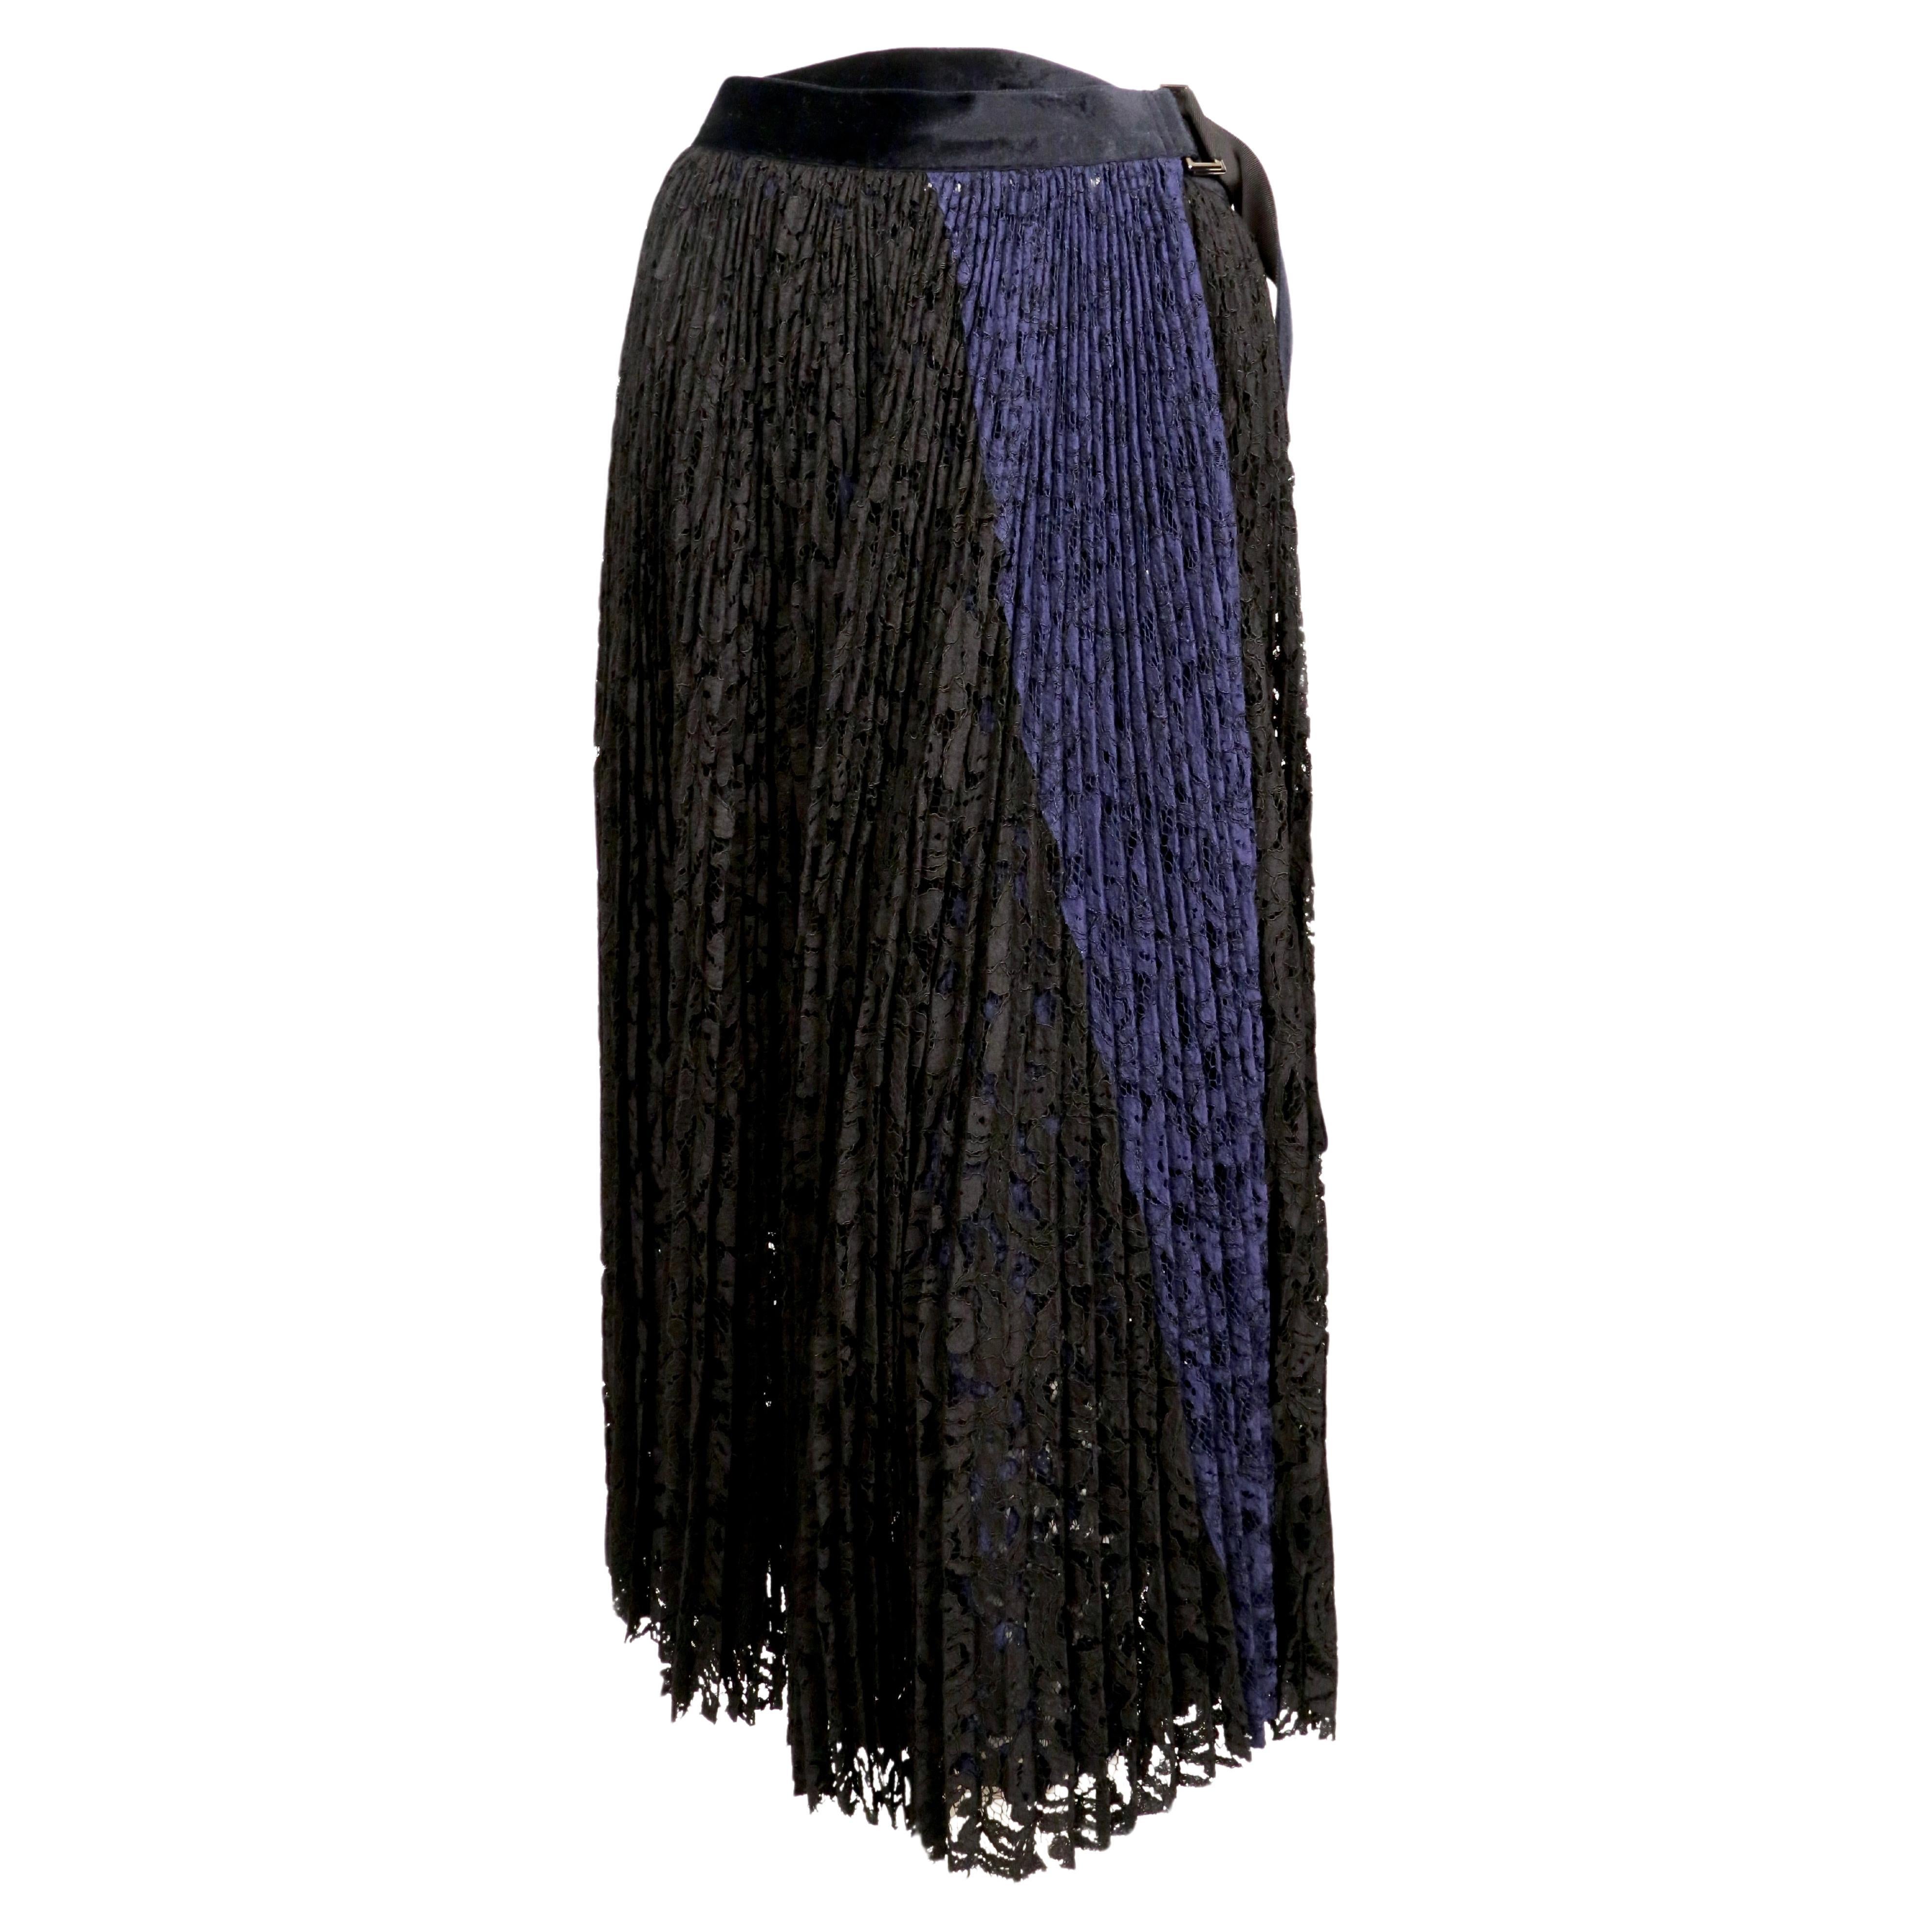 Black and blue lace wrap skirt with black slip from Sacai. No size is indicated however this is most likely a '1'. Skirt was not clipped on size 2 mannequin. Approximate measurements: length 33